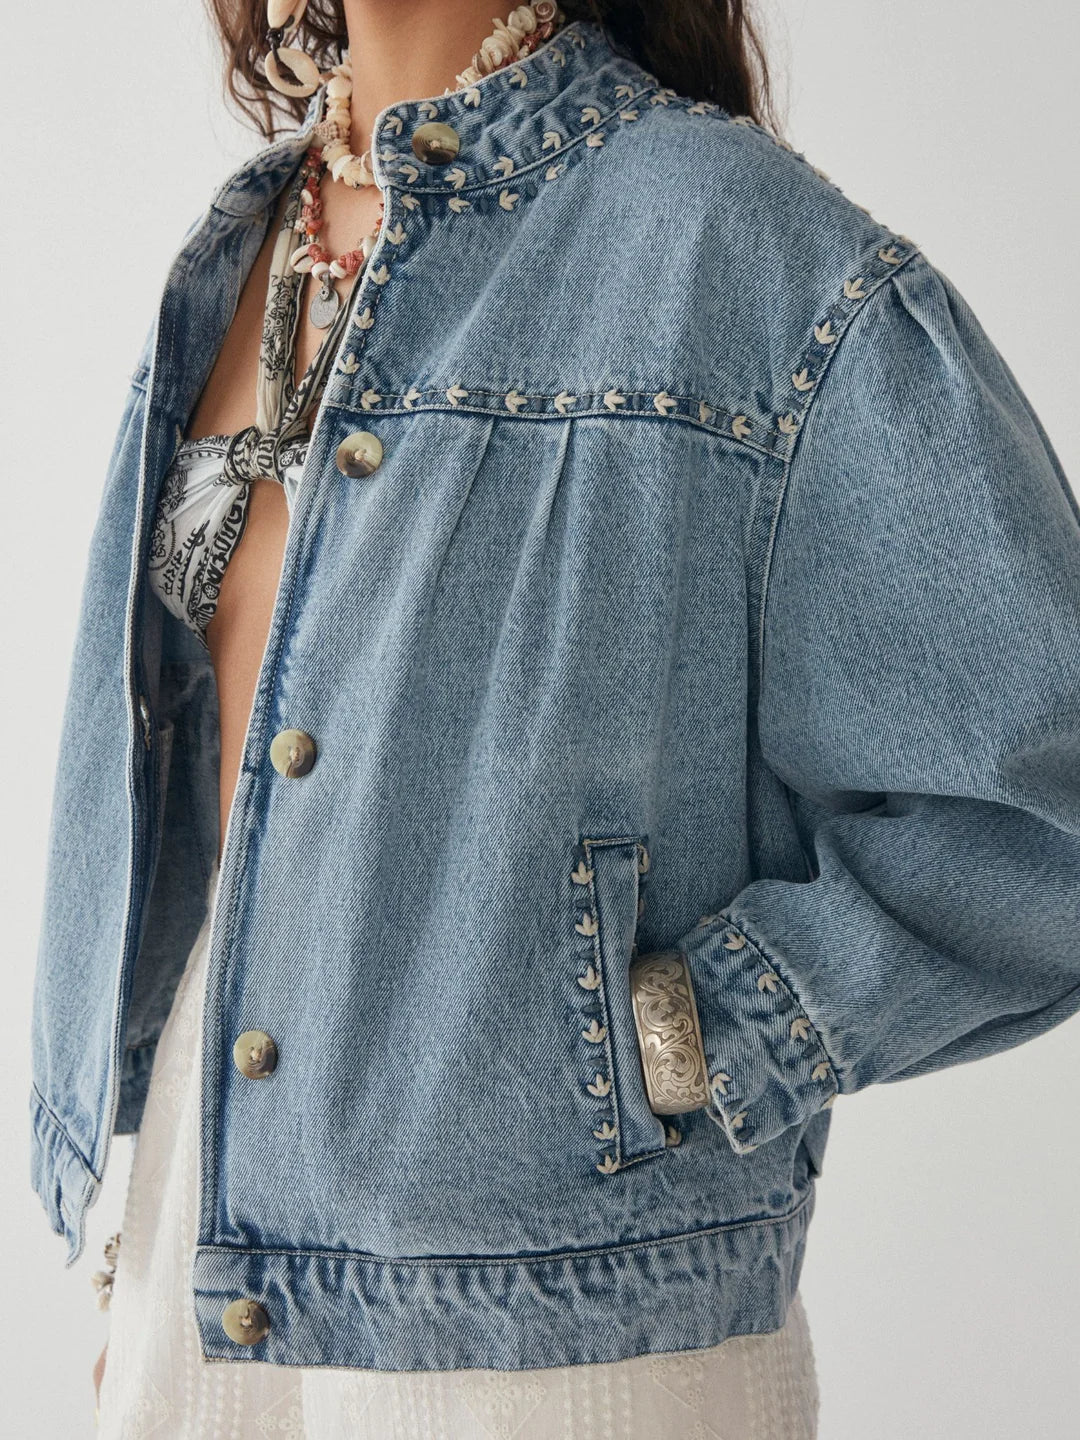 Model wears denim jacket with round collar and embroidered seams and cuffs